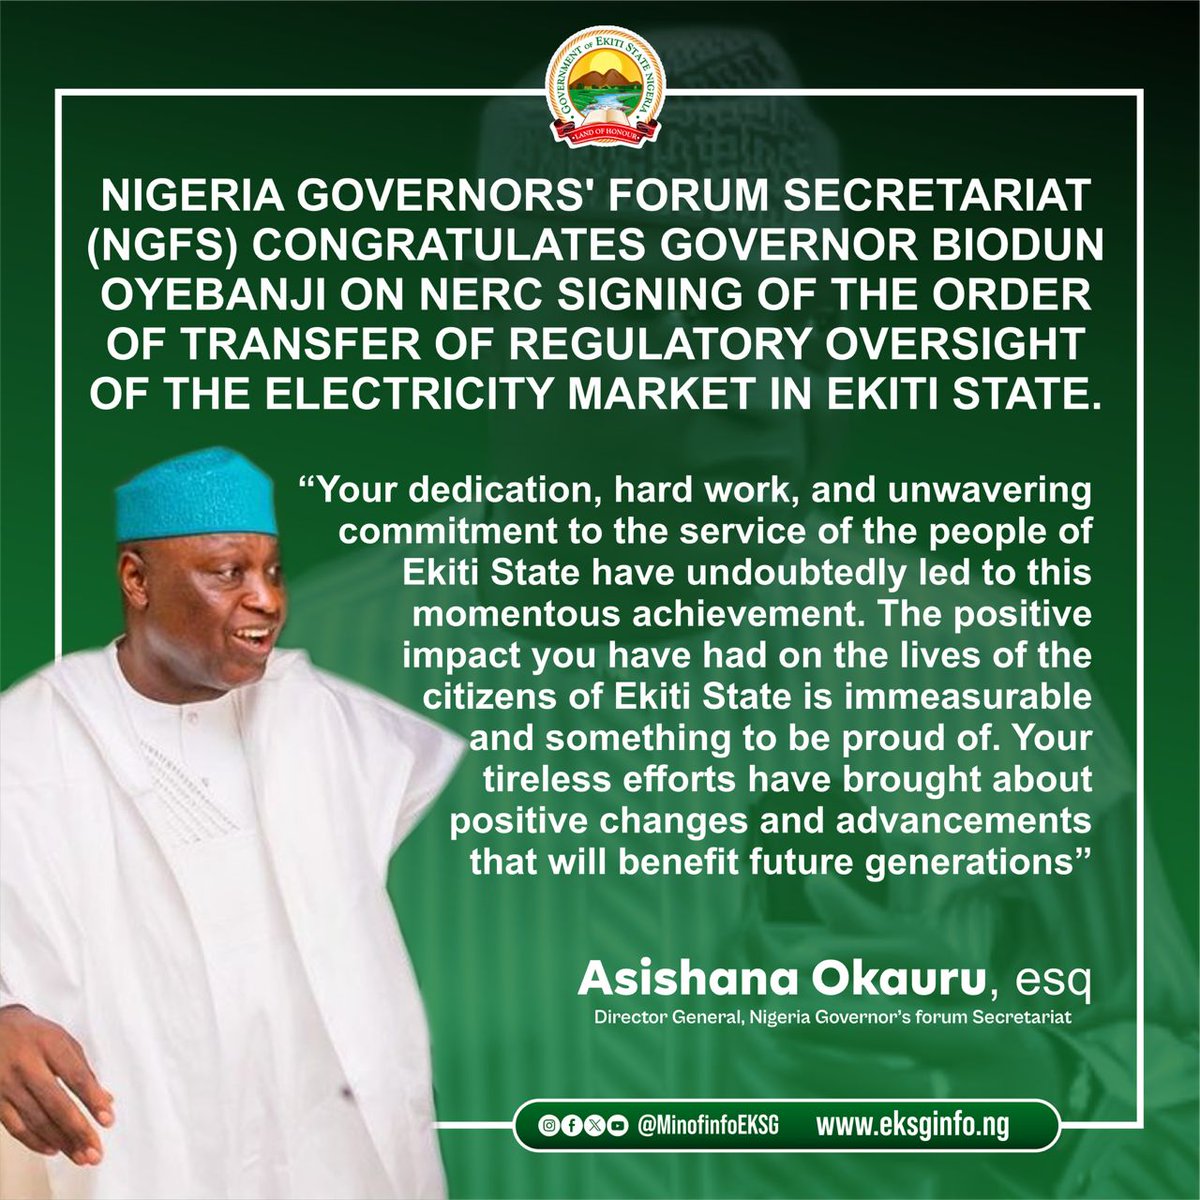 The Nigeria Governors' Forum Secretariat (NGFS) congratulates Governor @biodunaoyebanji on the NERC signing of the Order of Transfer of Regulatory Oversight of the electricity market in Ekiti State.